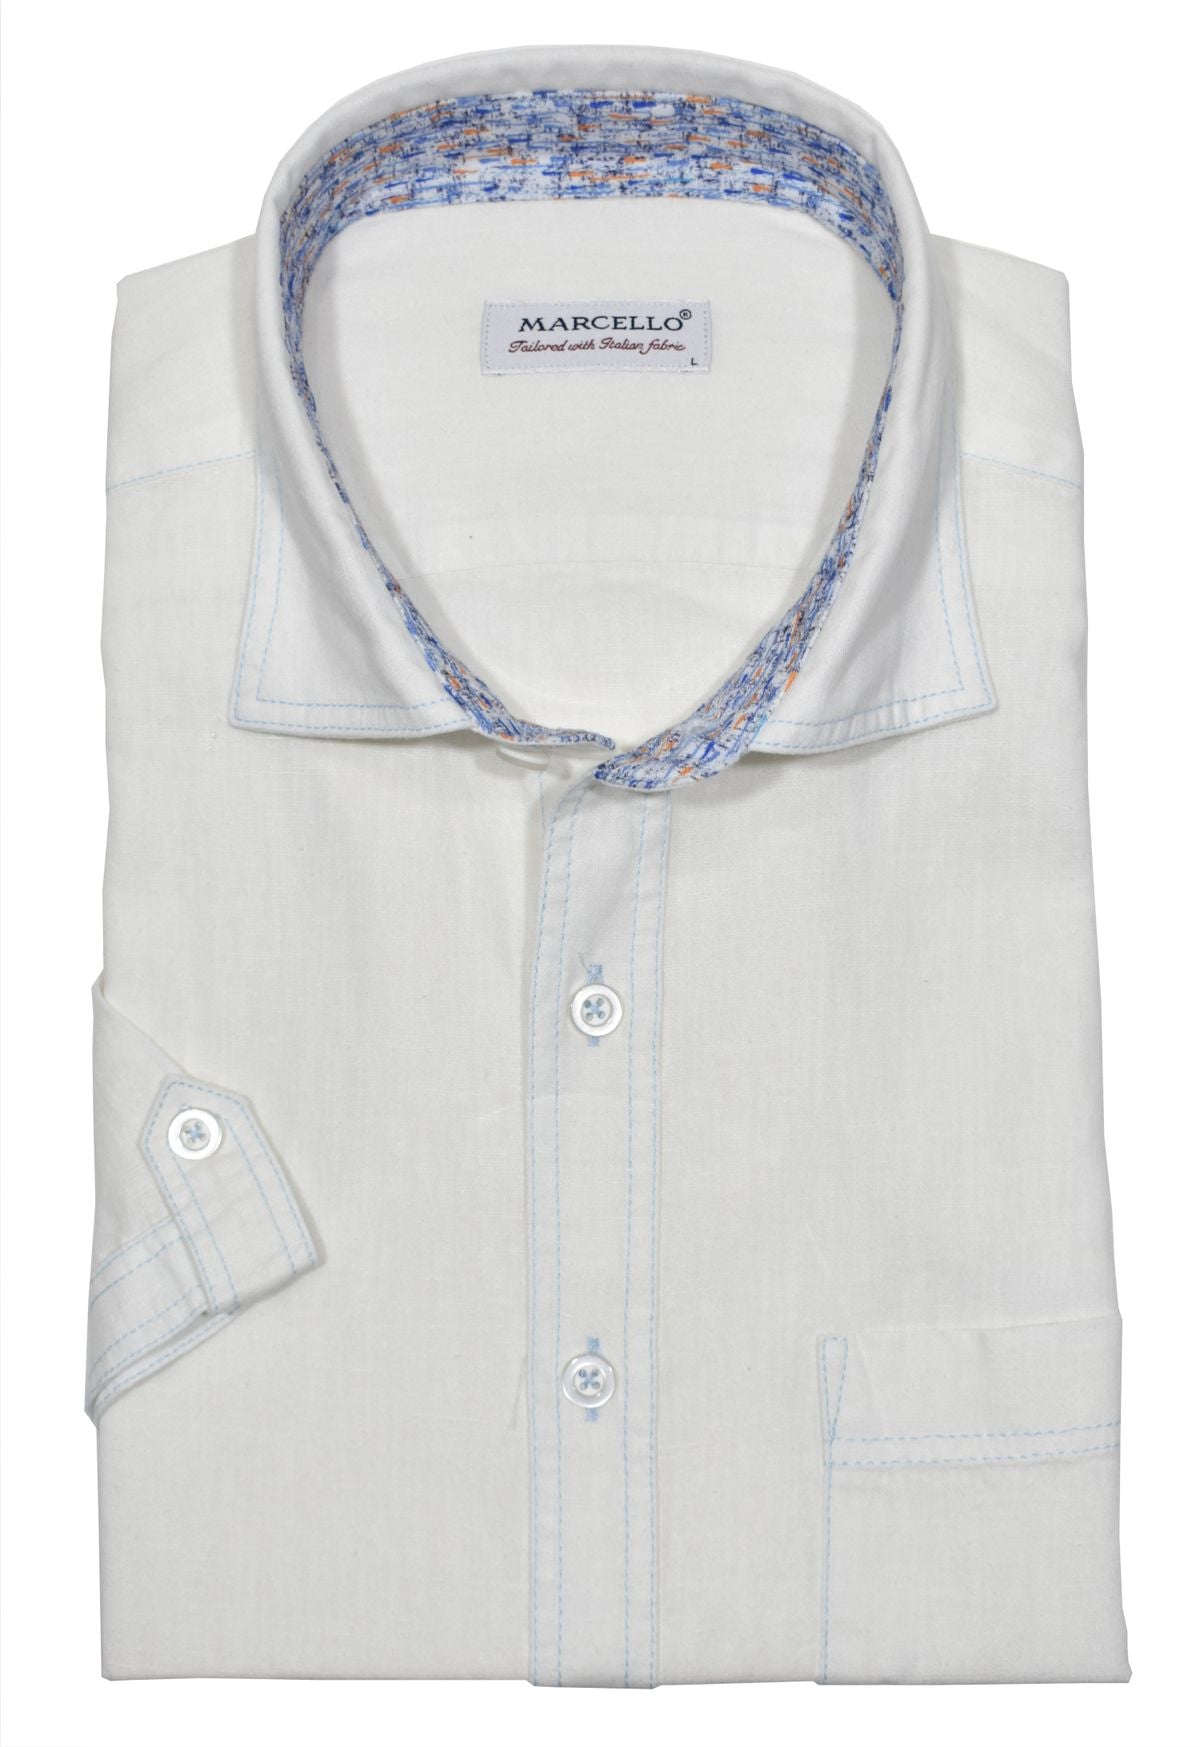 Upgrade your wardrobe with the Marcello W836S White Cotton Linen shirt. Experience the luxurious softness of cotton combined with the elegant linen-like appearance. With a soft collar, multi-track contrast stitching, and a classic chest pocket, this shirt is both stylish and comfortable.